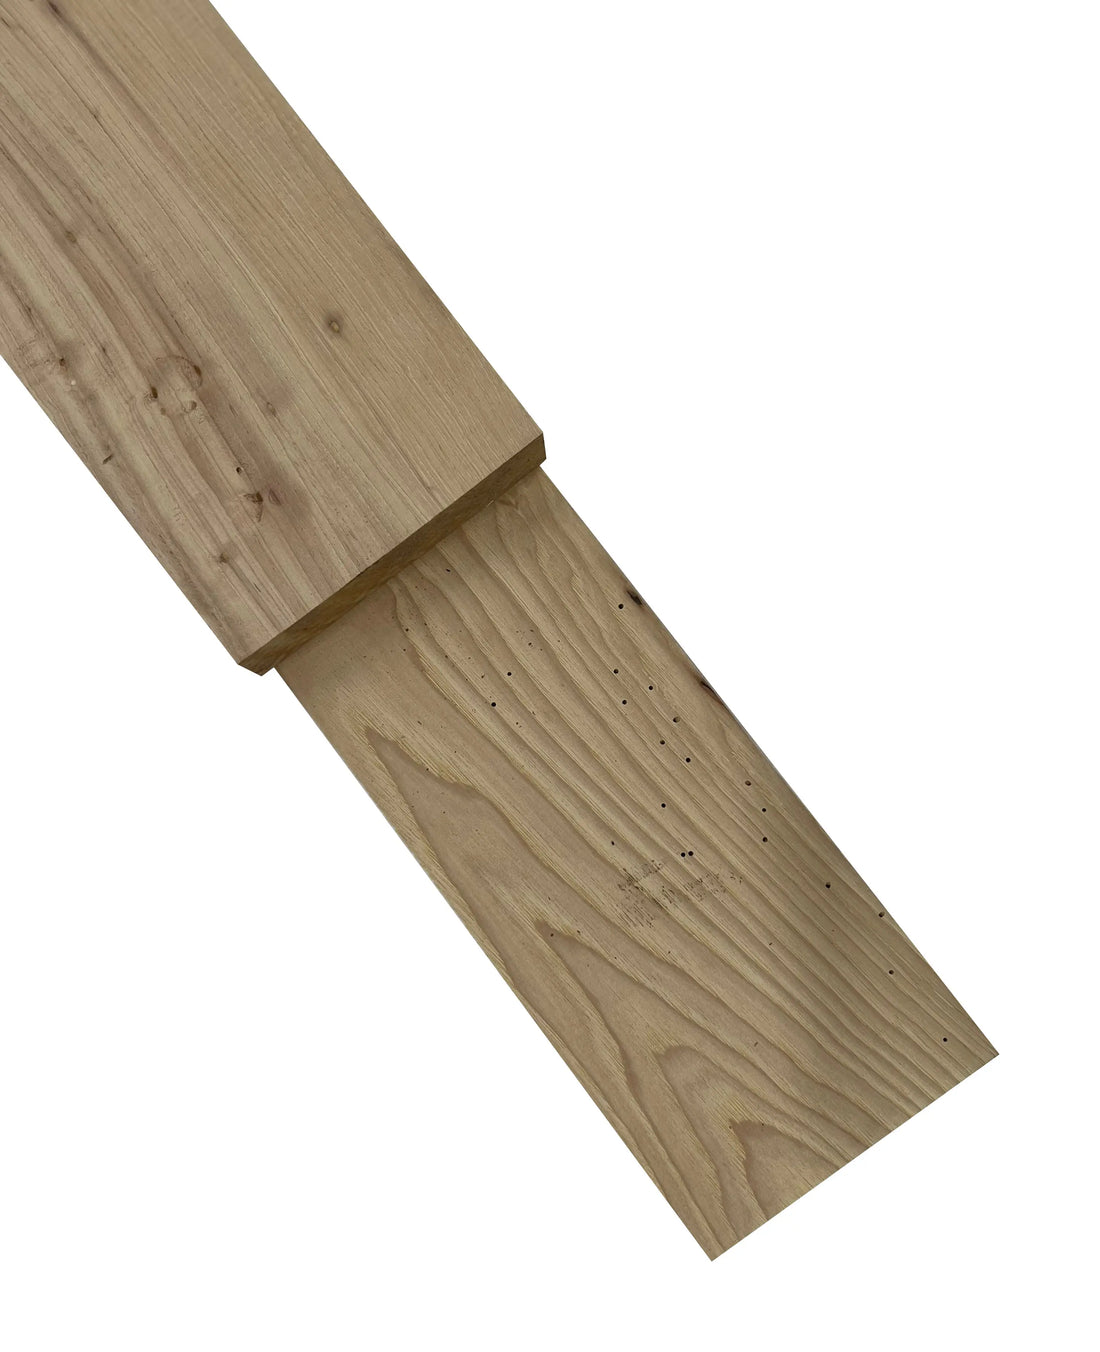 Premium Black Walnut 8/4 Lumber, Clear One Side - Woodworkers Source